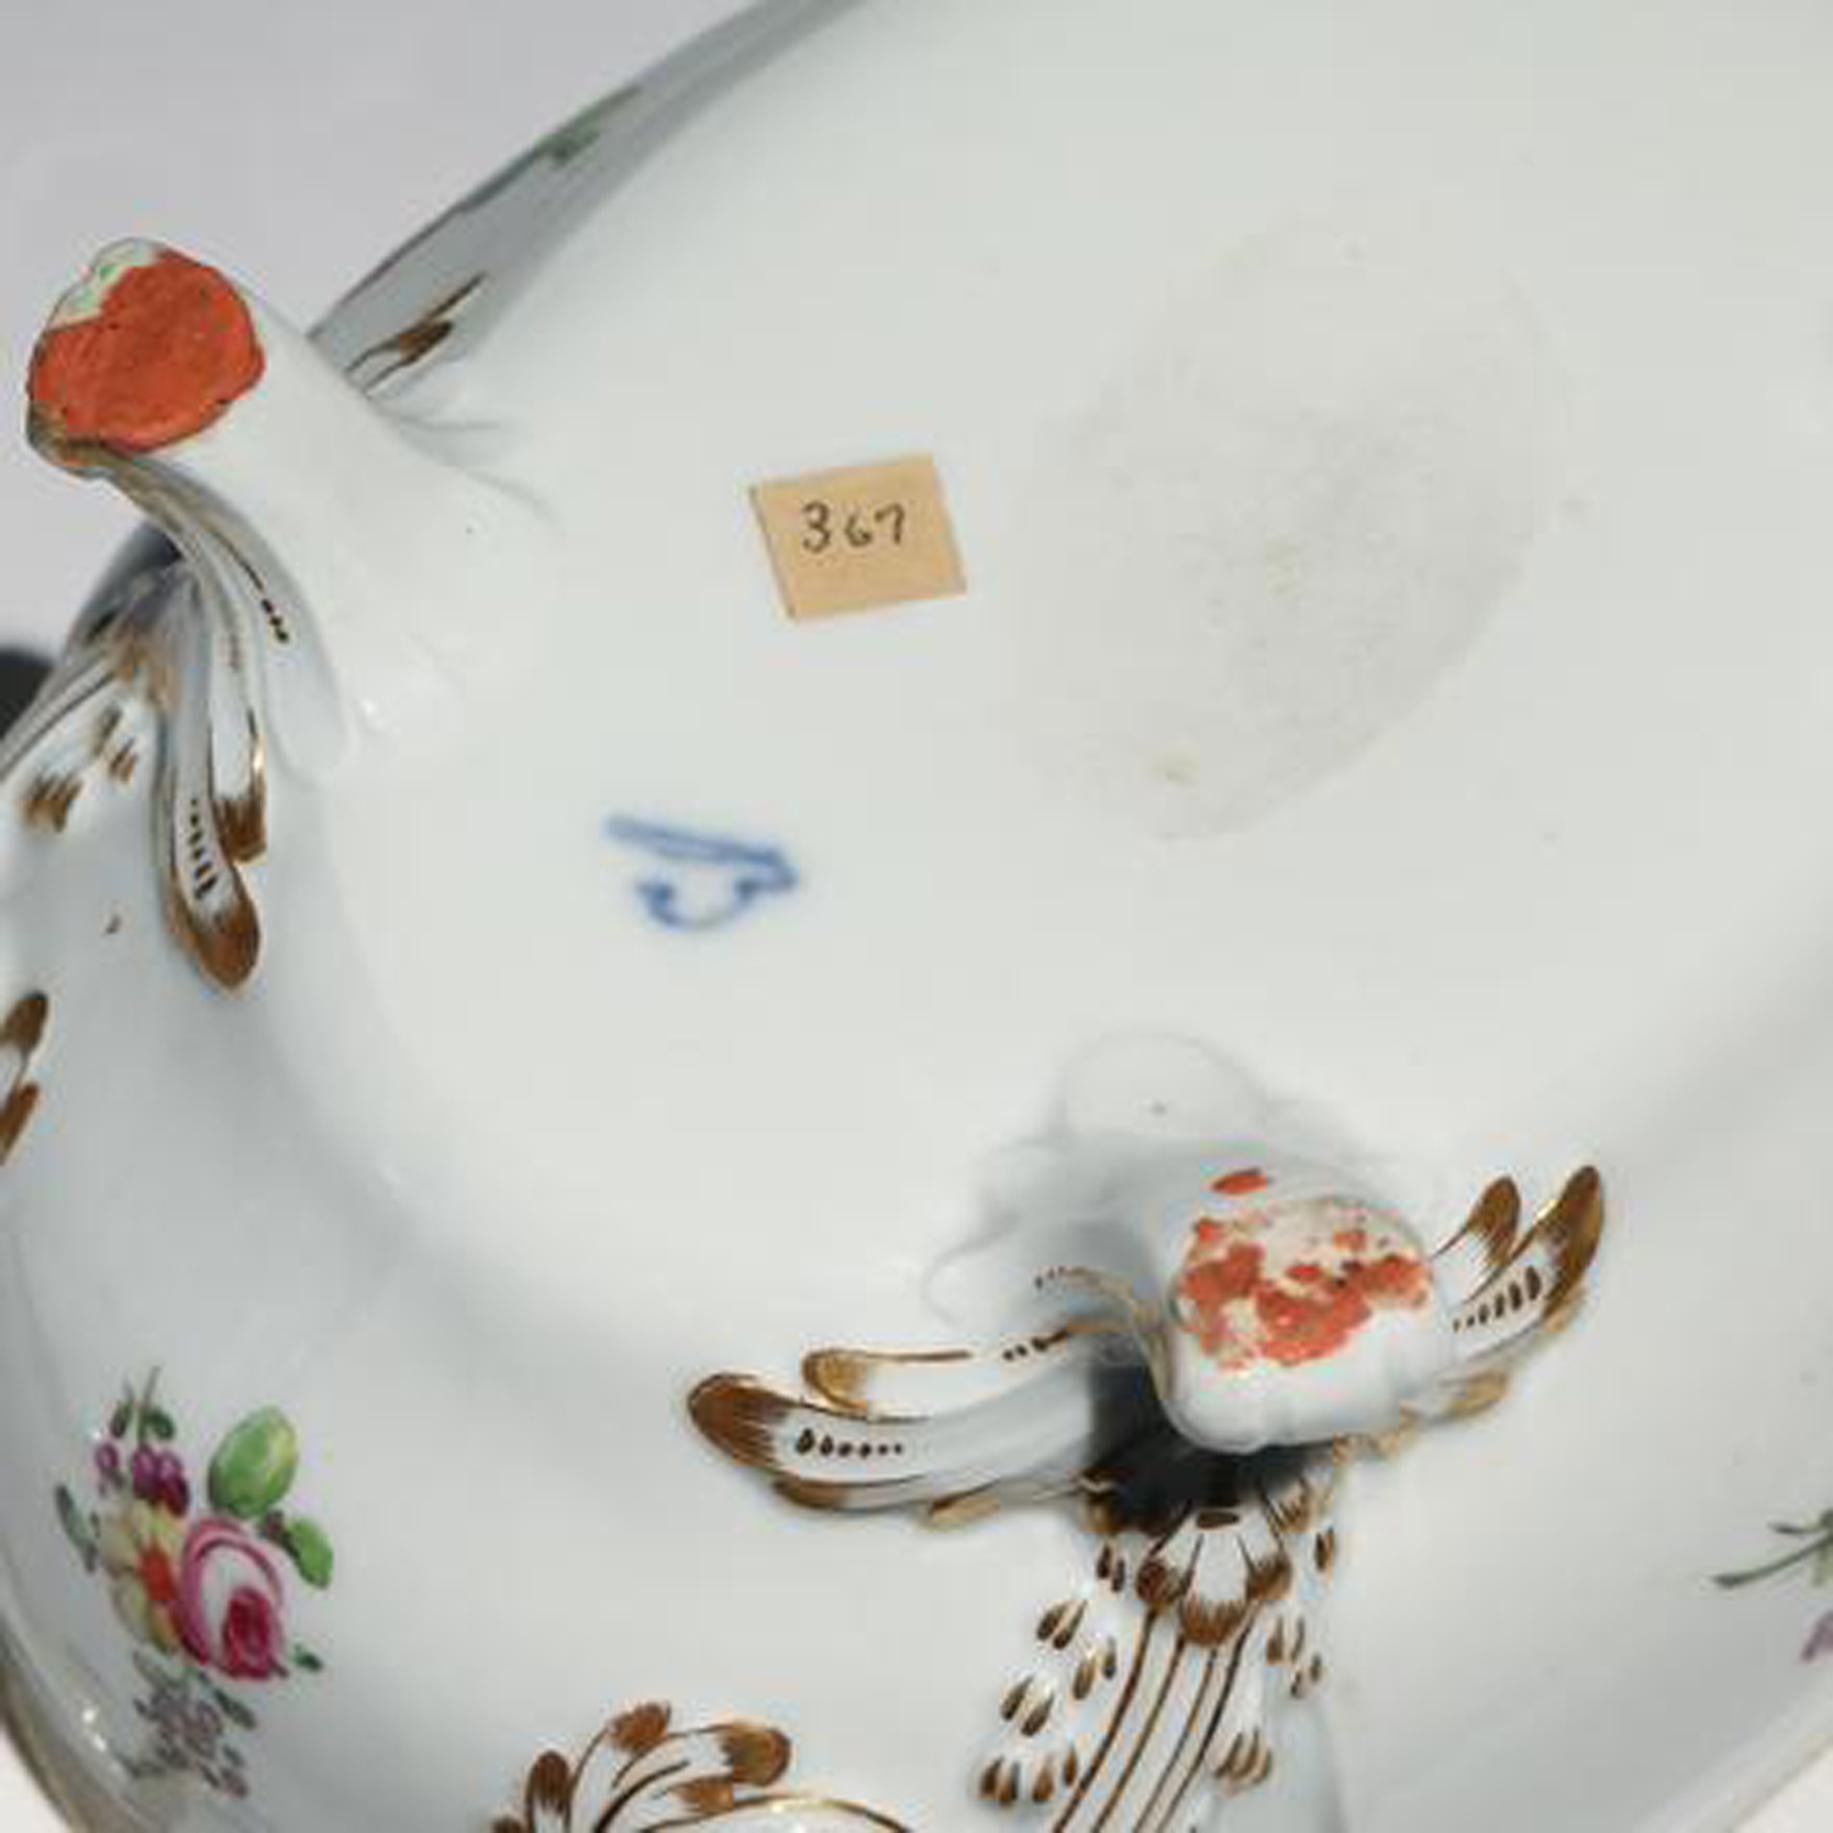 French porcelain soup tureen and cover, 
Jacques Vermonet & Fils, 
Boissettes Factory, (Duke d'Orleans),
circa 1780.

The elegant and stylish tureen after the Sèvres rises on four flared feet and is well painted with bouquets of flowers